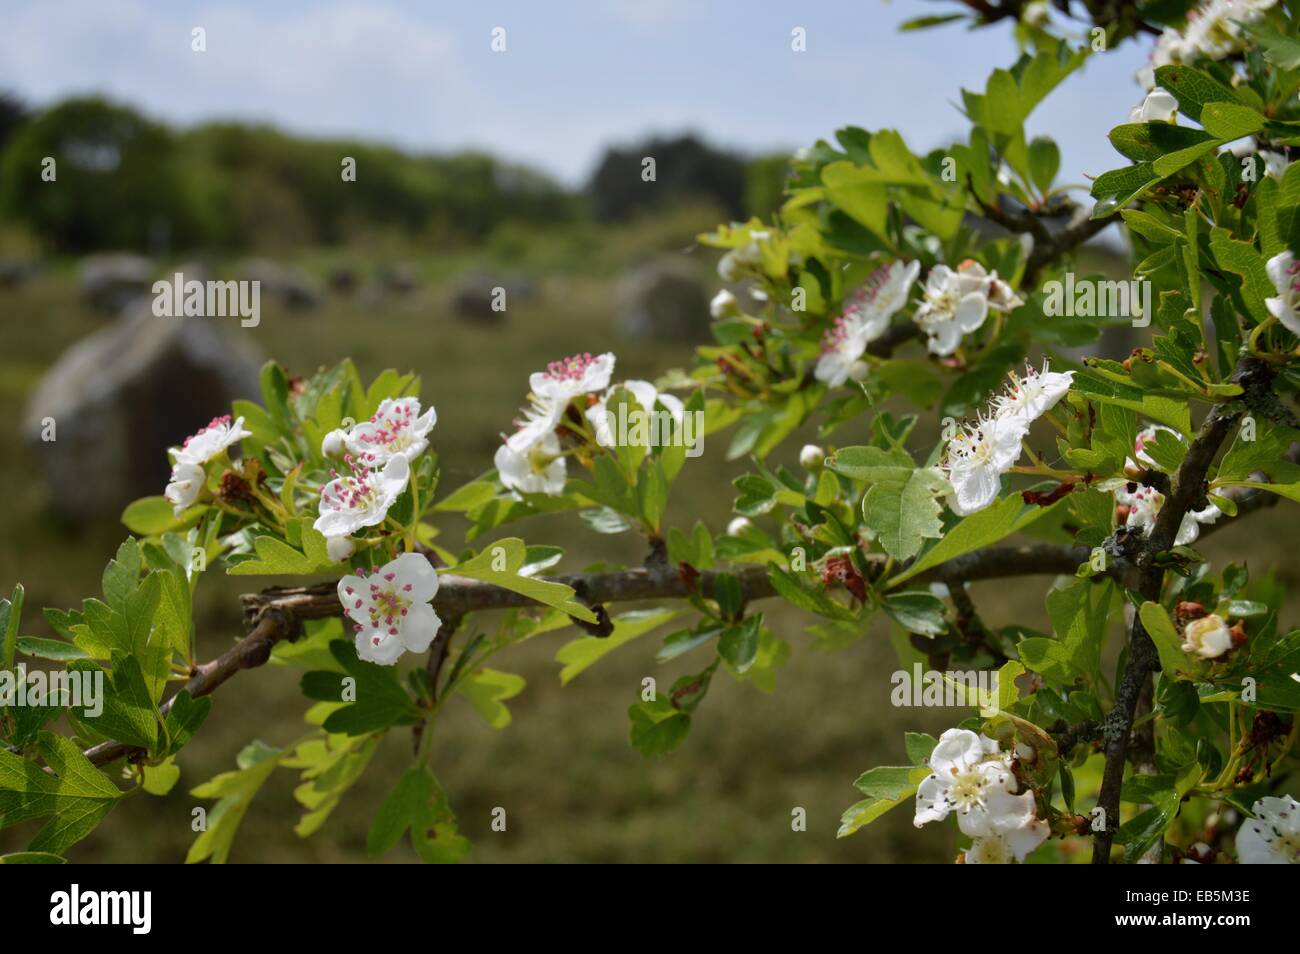 White Hawthorn blossom with Carnac standing Stones in the background Stock Photo